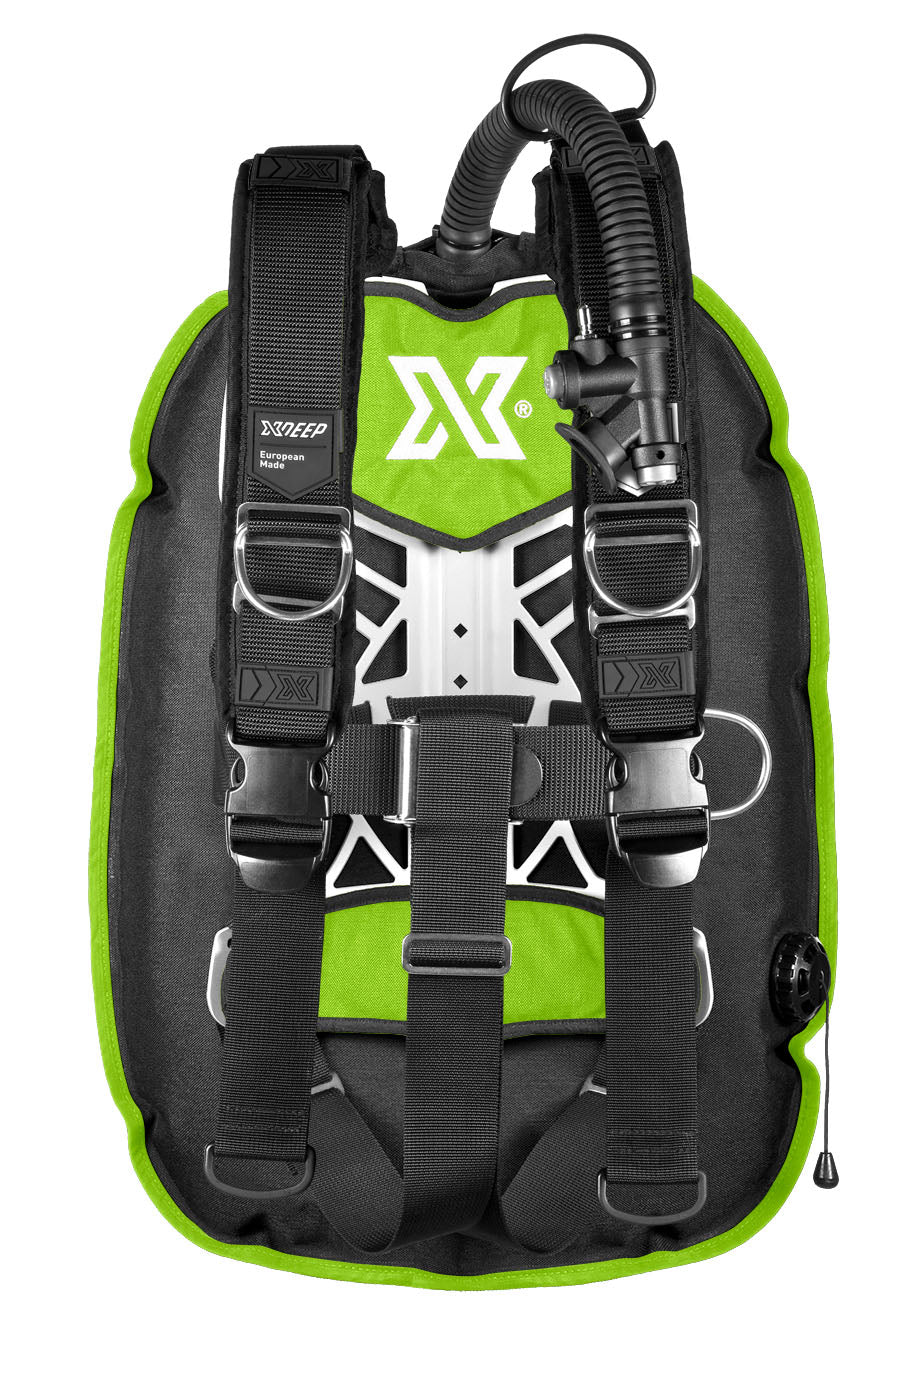 XDEEP XDEEP GHOST Full Setup with Standard or Deluxe harness Lime / Deluxe / Small - Oyster Diving